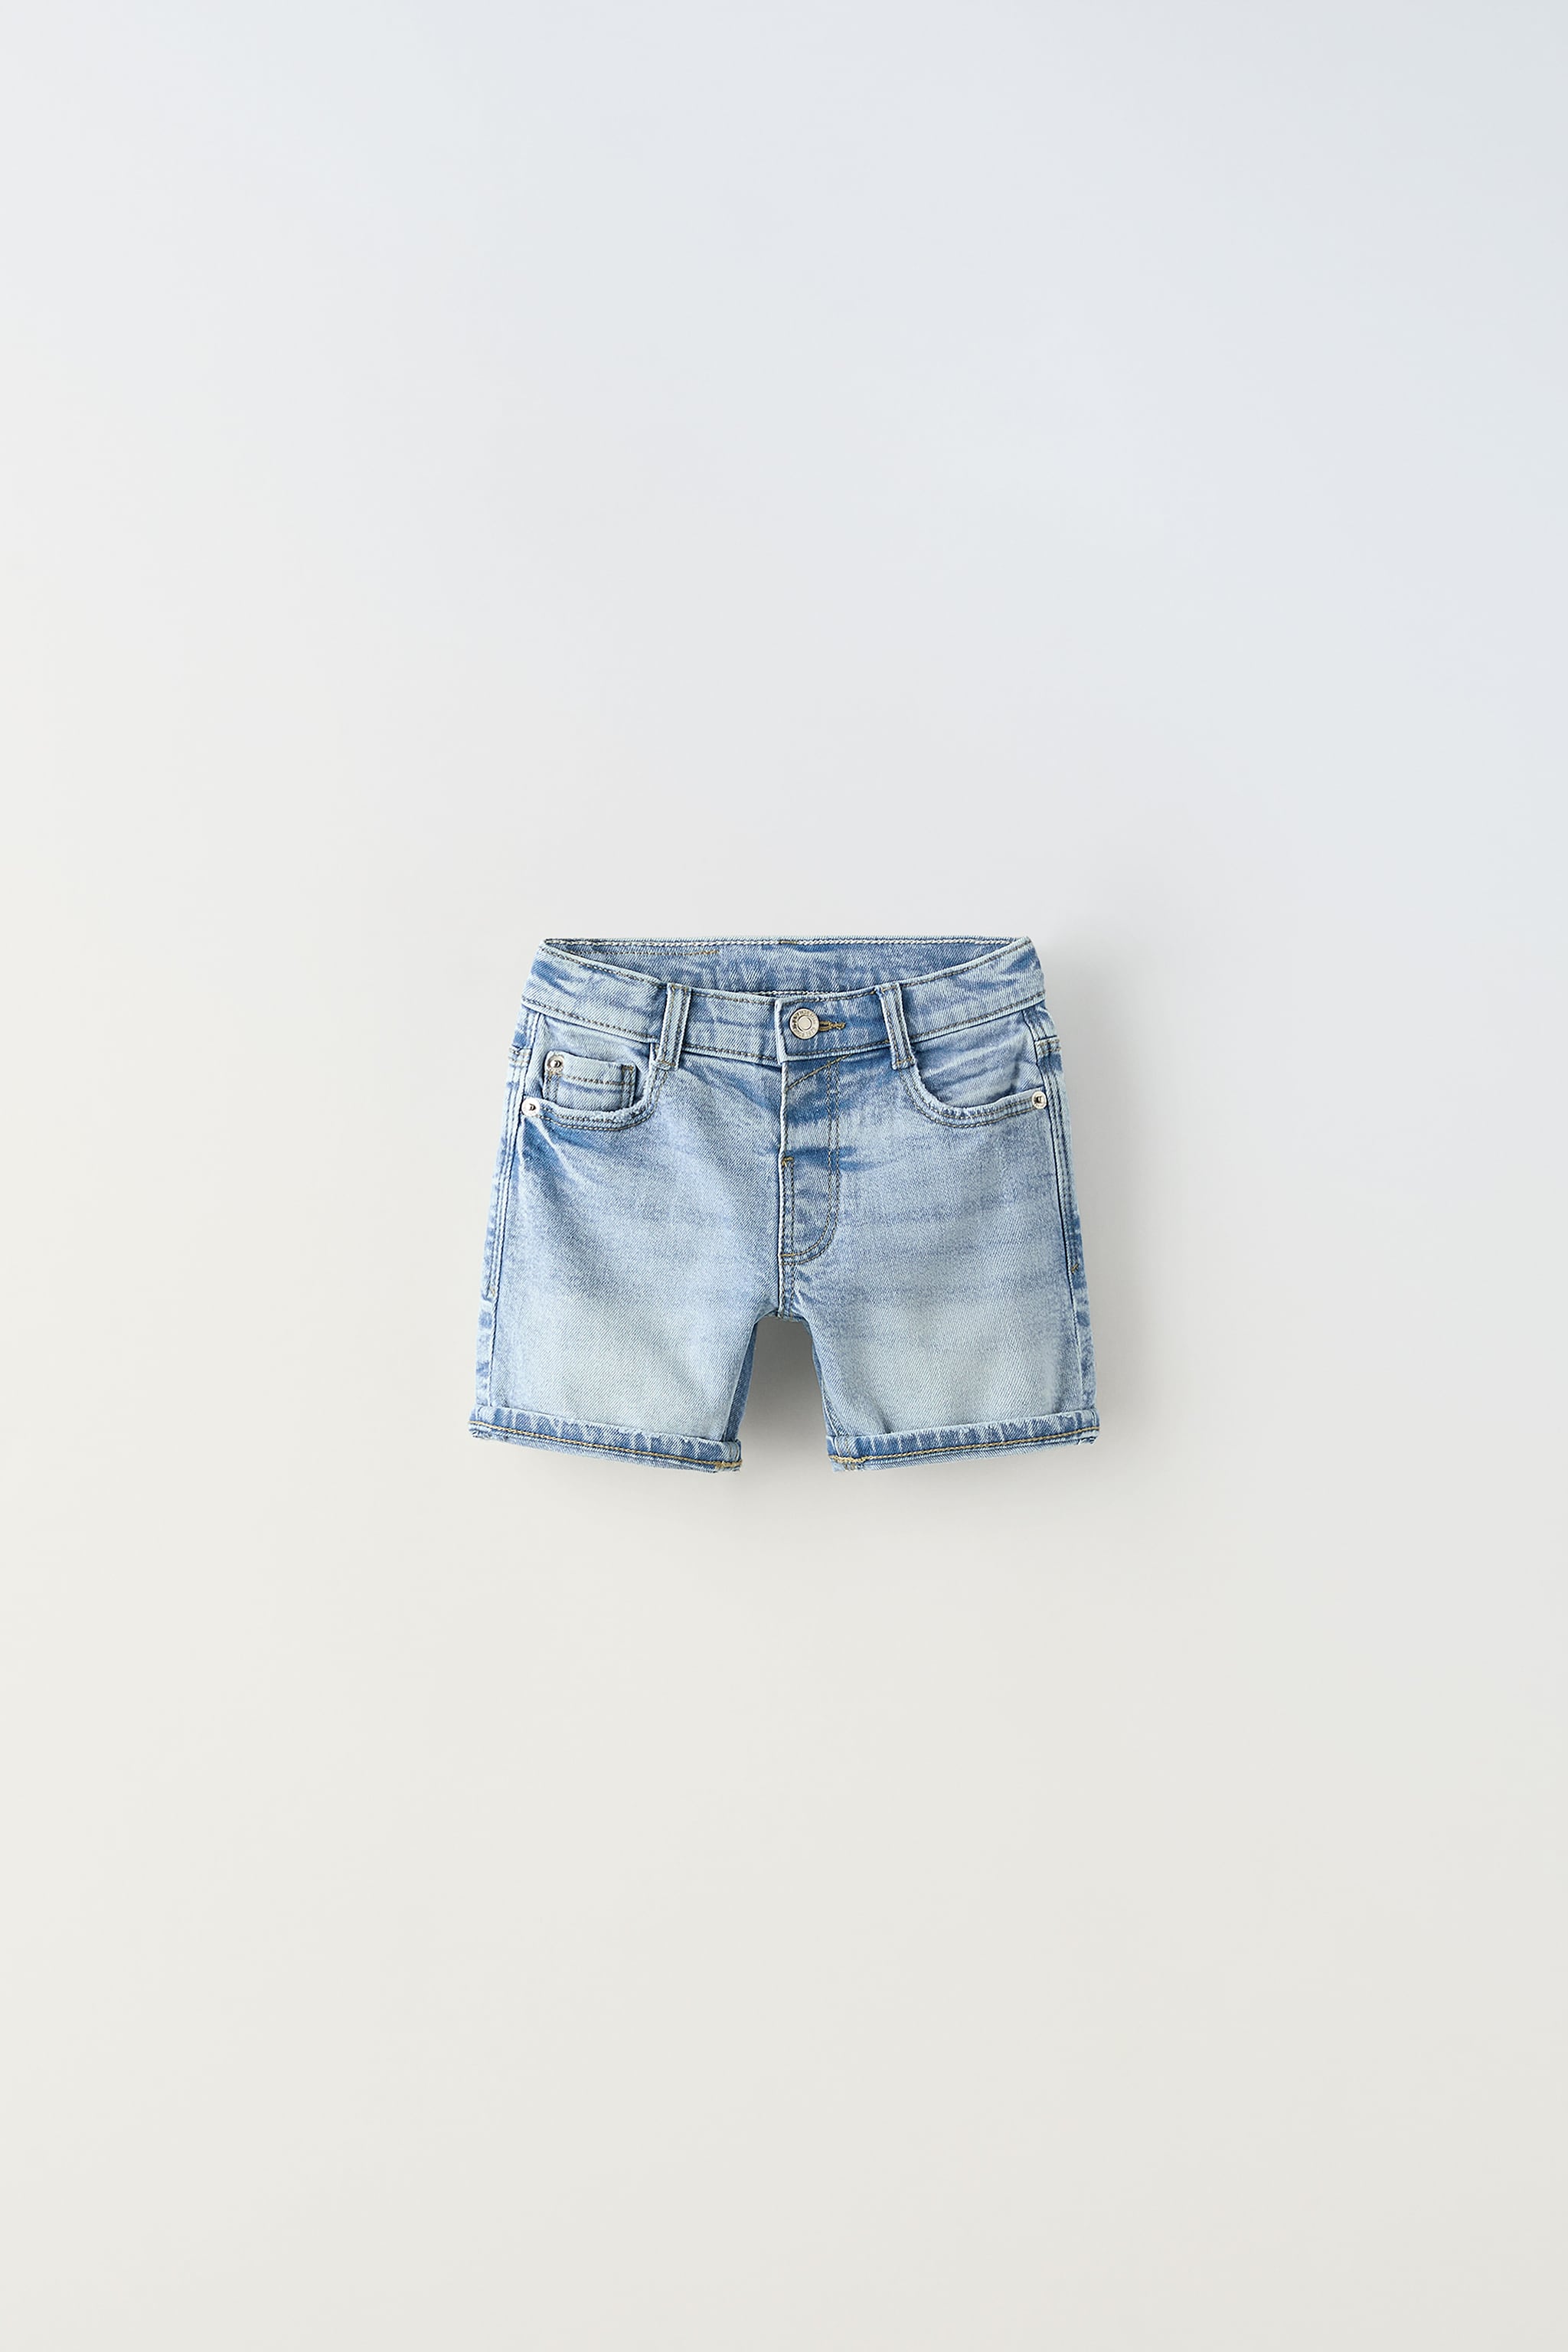 Shorts with interior adjustable waistband and Front button closure. pockets back patch pockets. Cuffed.